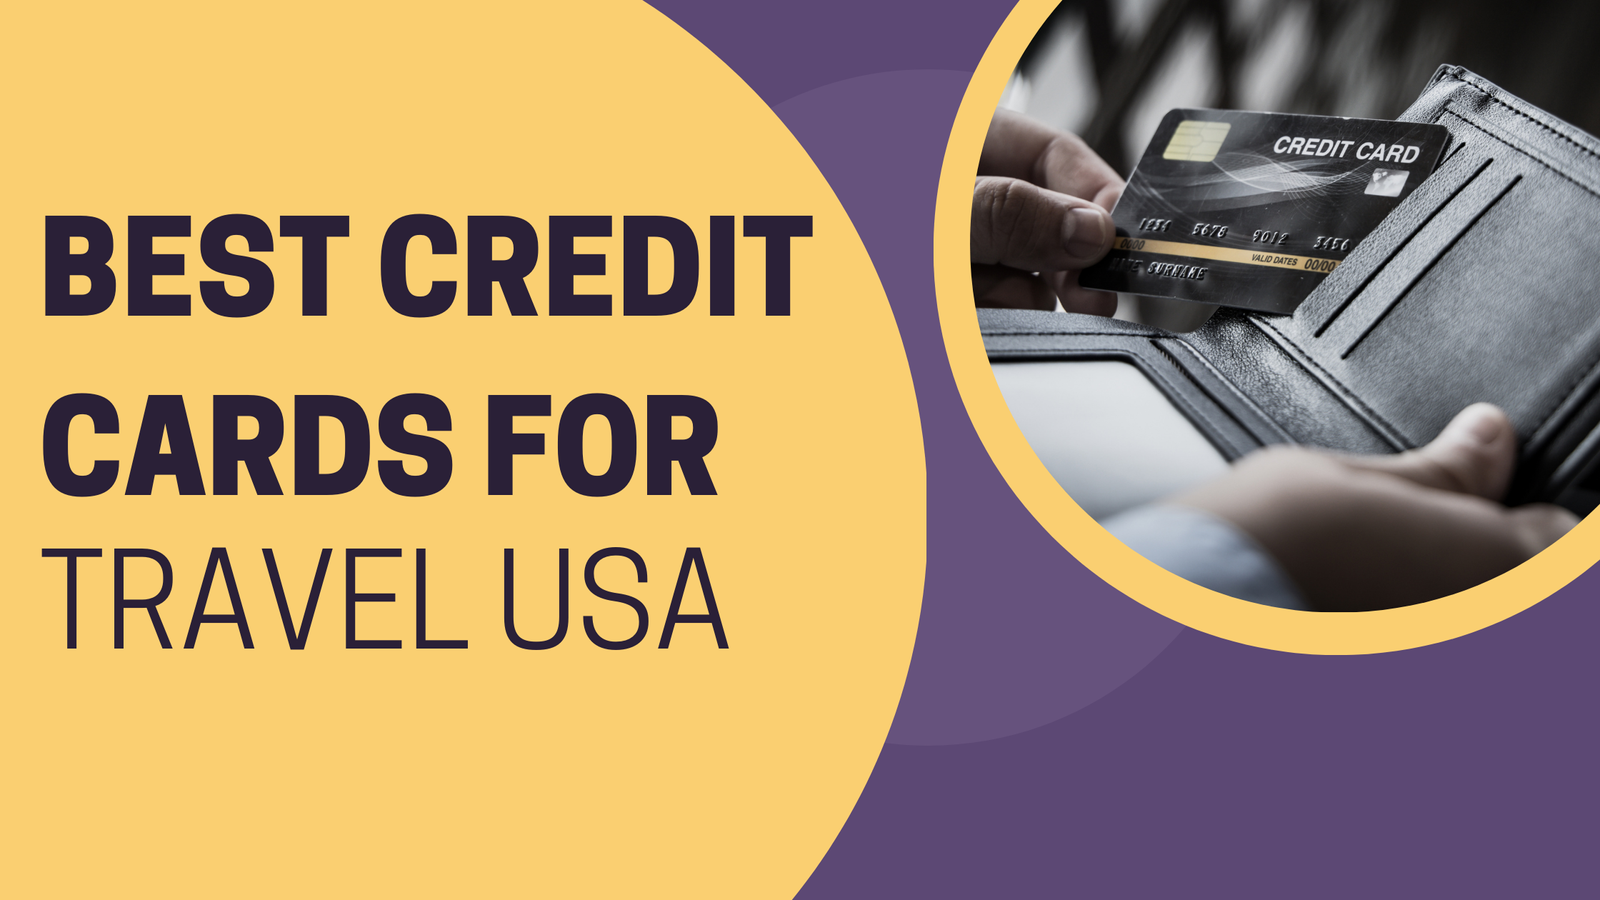 Best credit cards for travel USA